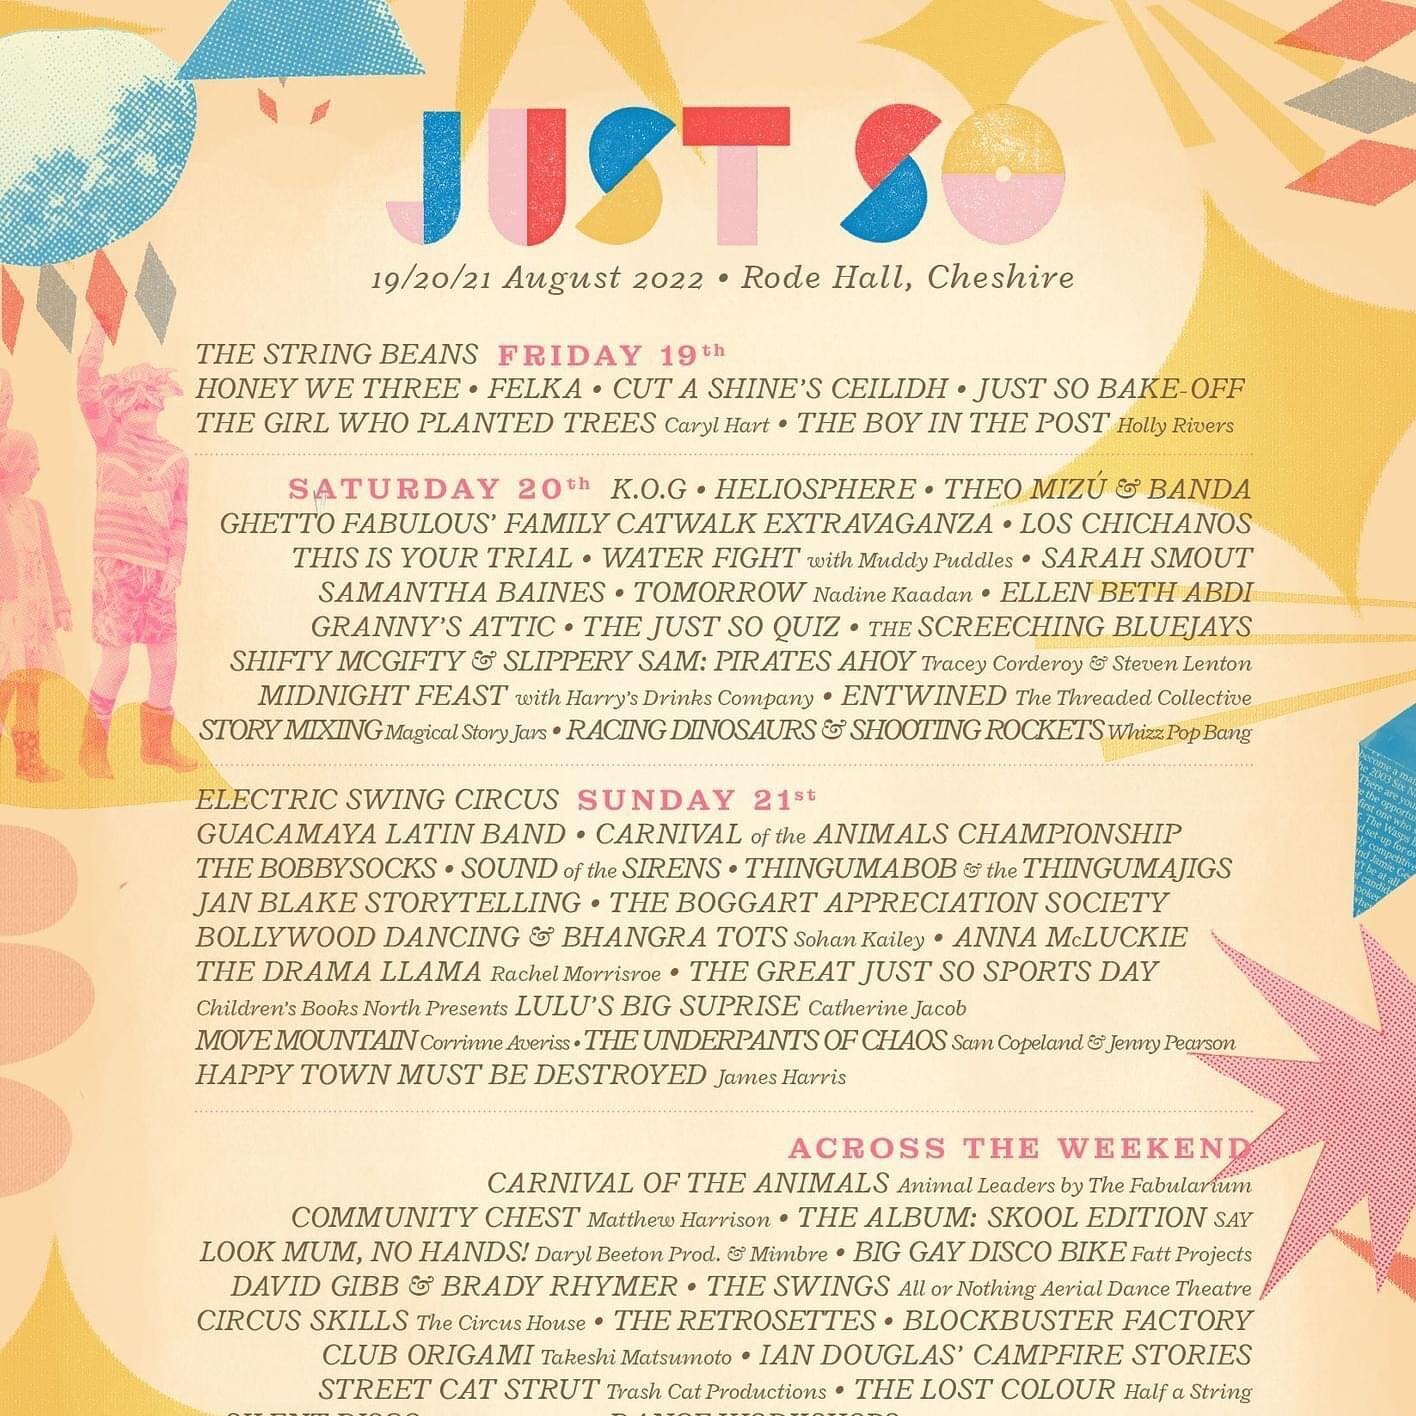 Hmm&hellip;.story mixing, a water fight or one of the many other amazing line ups we&rsquo;ve tagged. 🤔 Decisions decisions!  See you all very soon @justsofestival ✨🧡💫 

Visit www.justsofestival.org.uk for ticket information. 

📷 By @justsofestiv